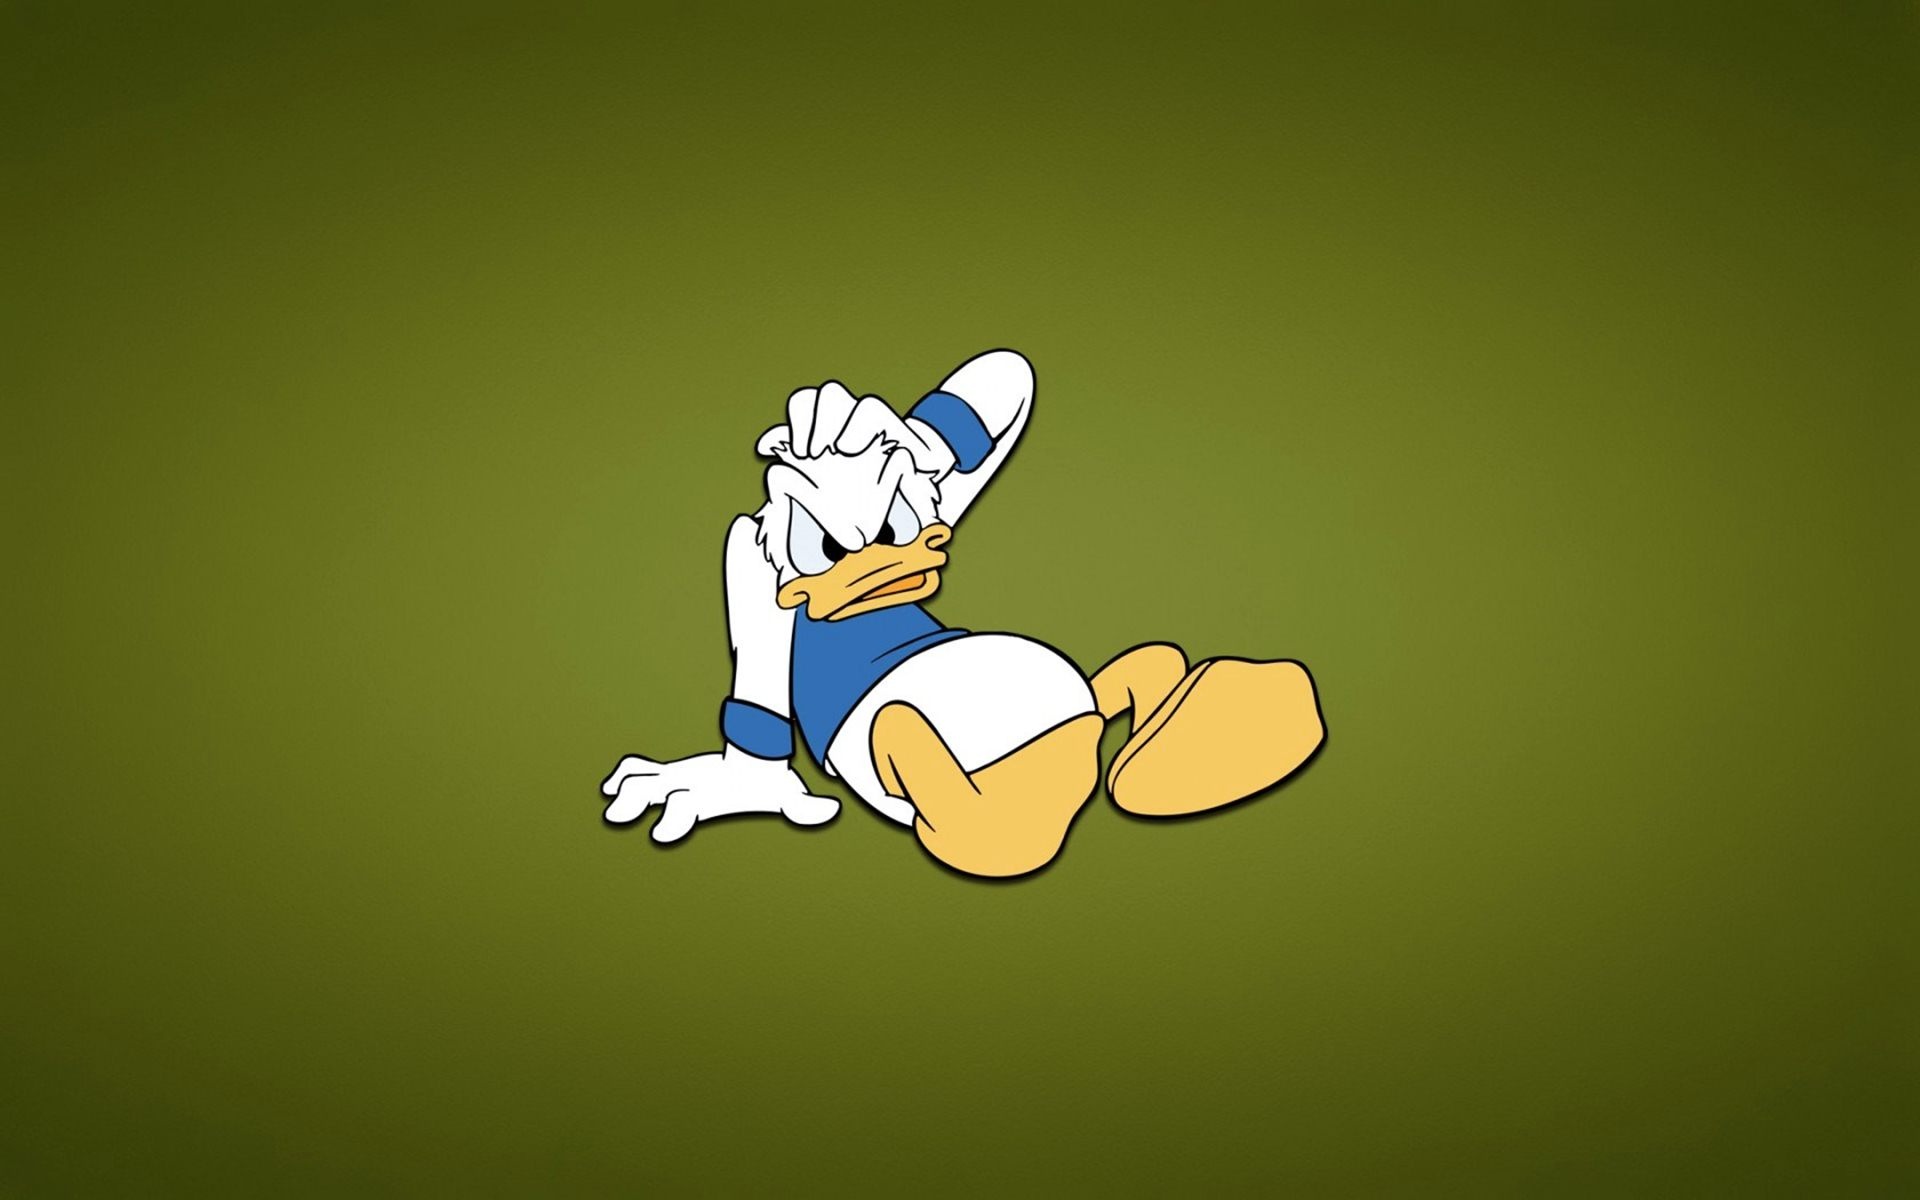 Donald Duck: Walt Disney's second most famous cartoon character after Mickey Mouse. 1920x1200 HD Wallpaper.